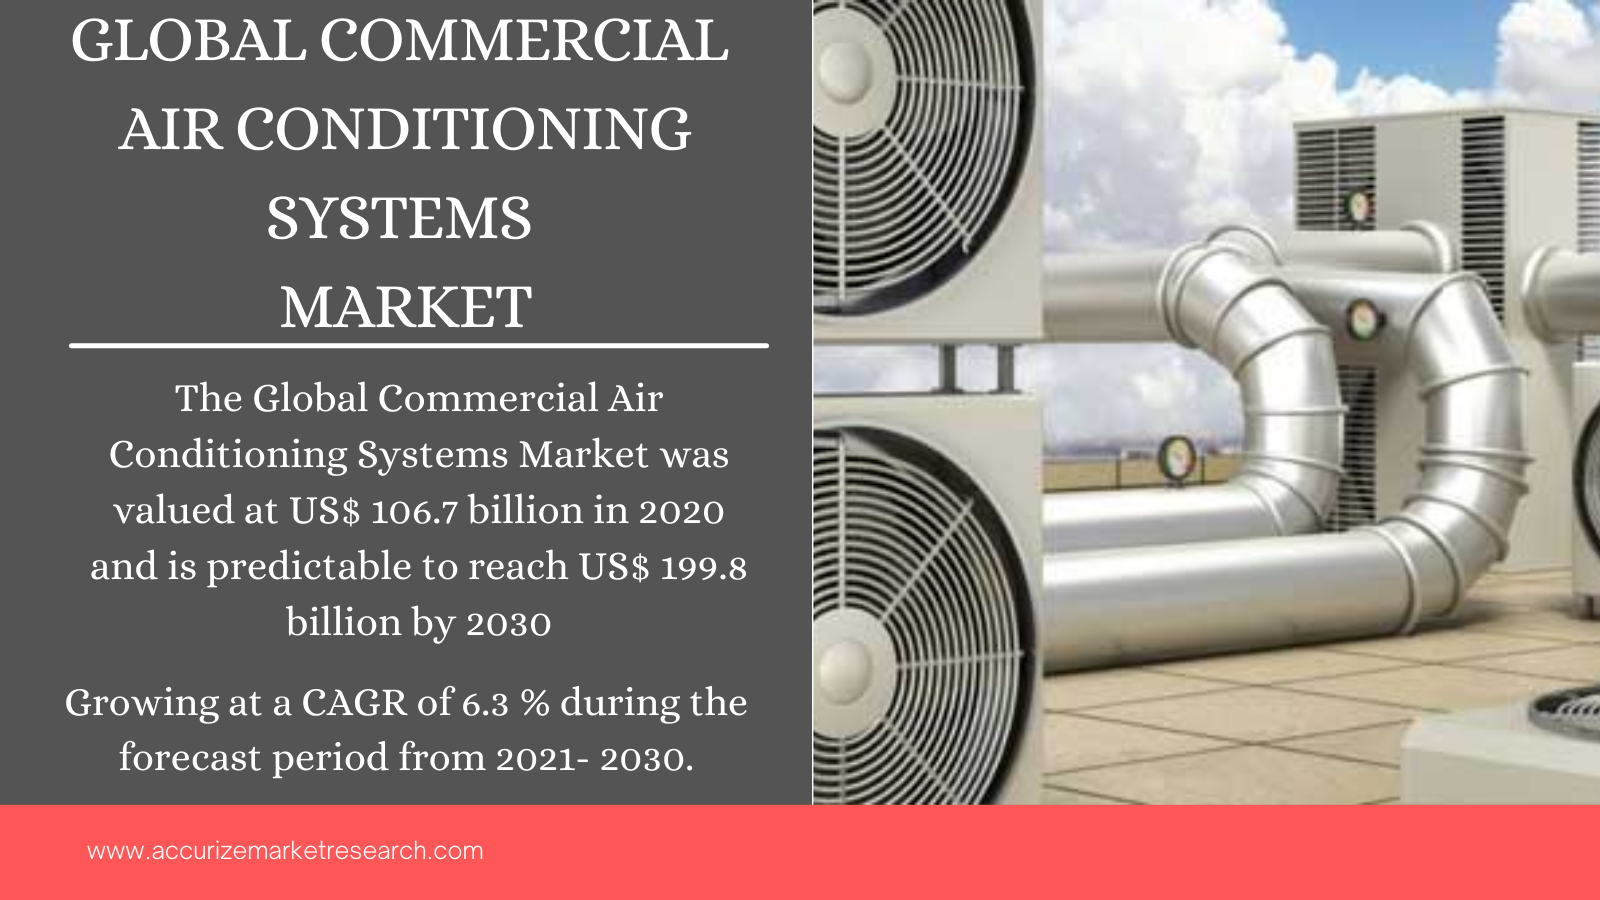 Global Commercial Air Conditioning Systems Market